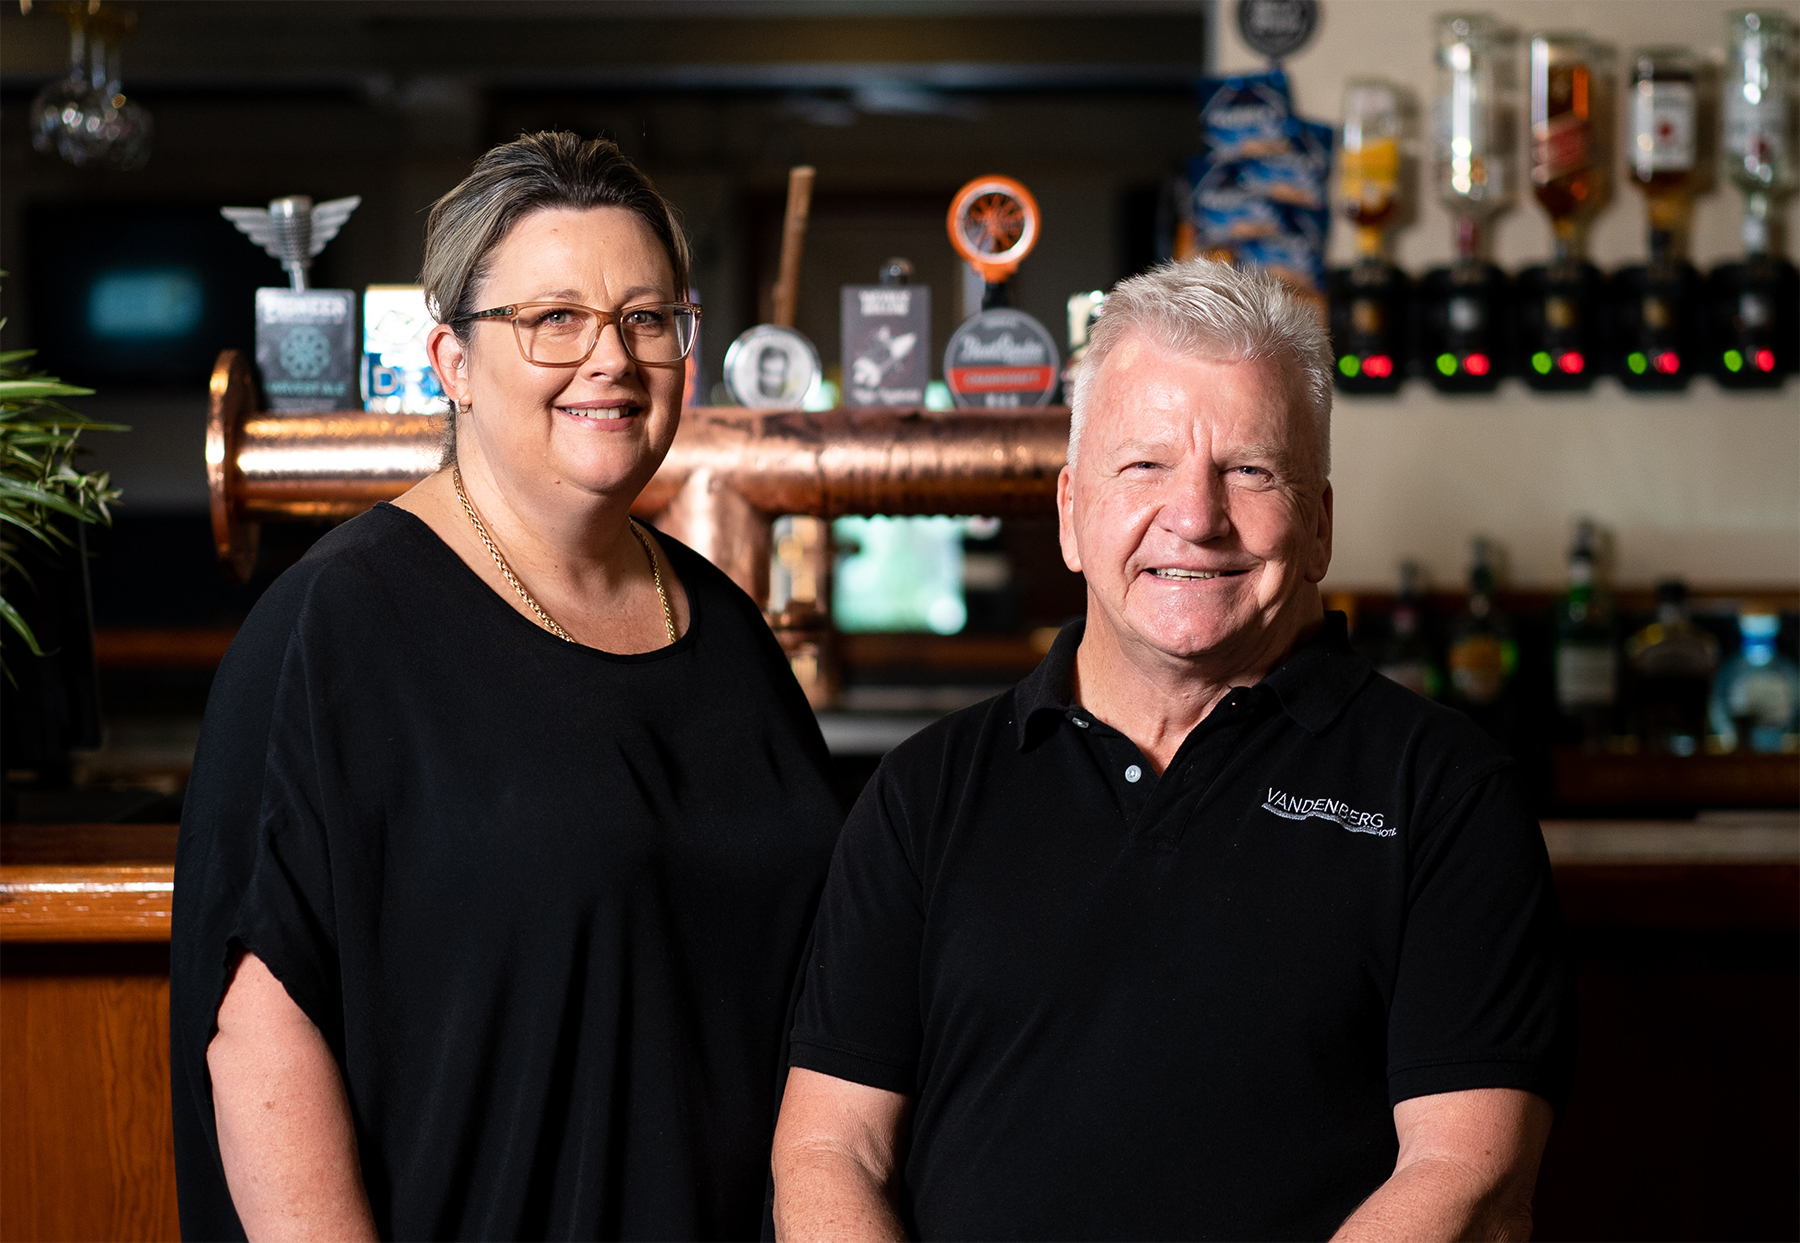 Grant Clifton and Kim Featherston are the faces of the Vandenberg Hotel